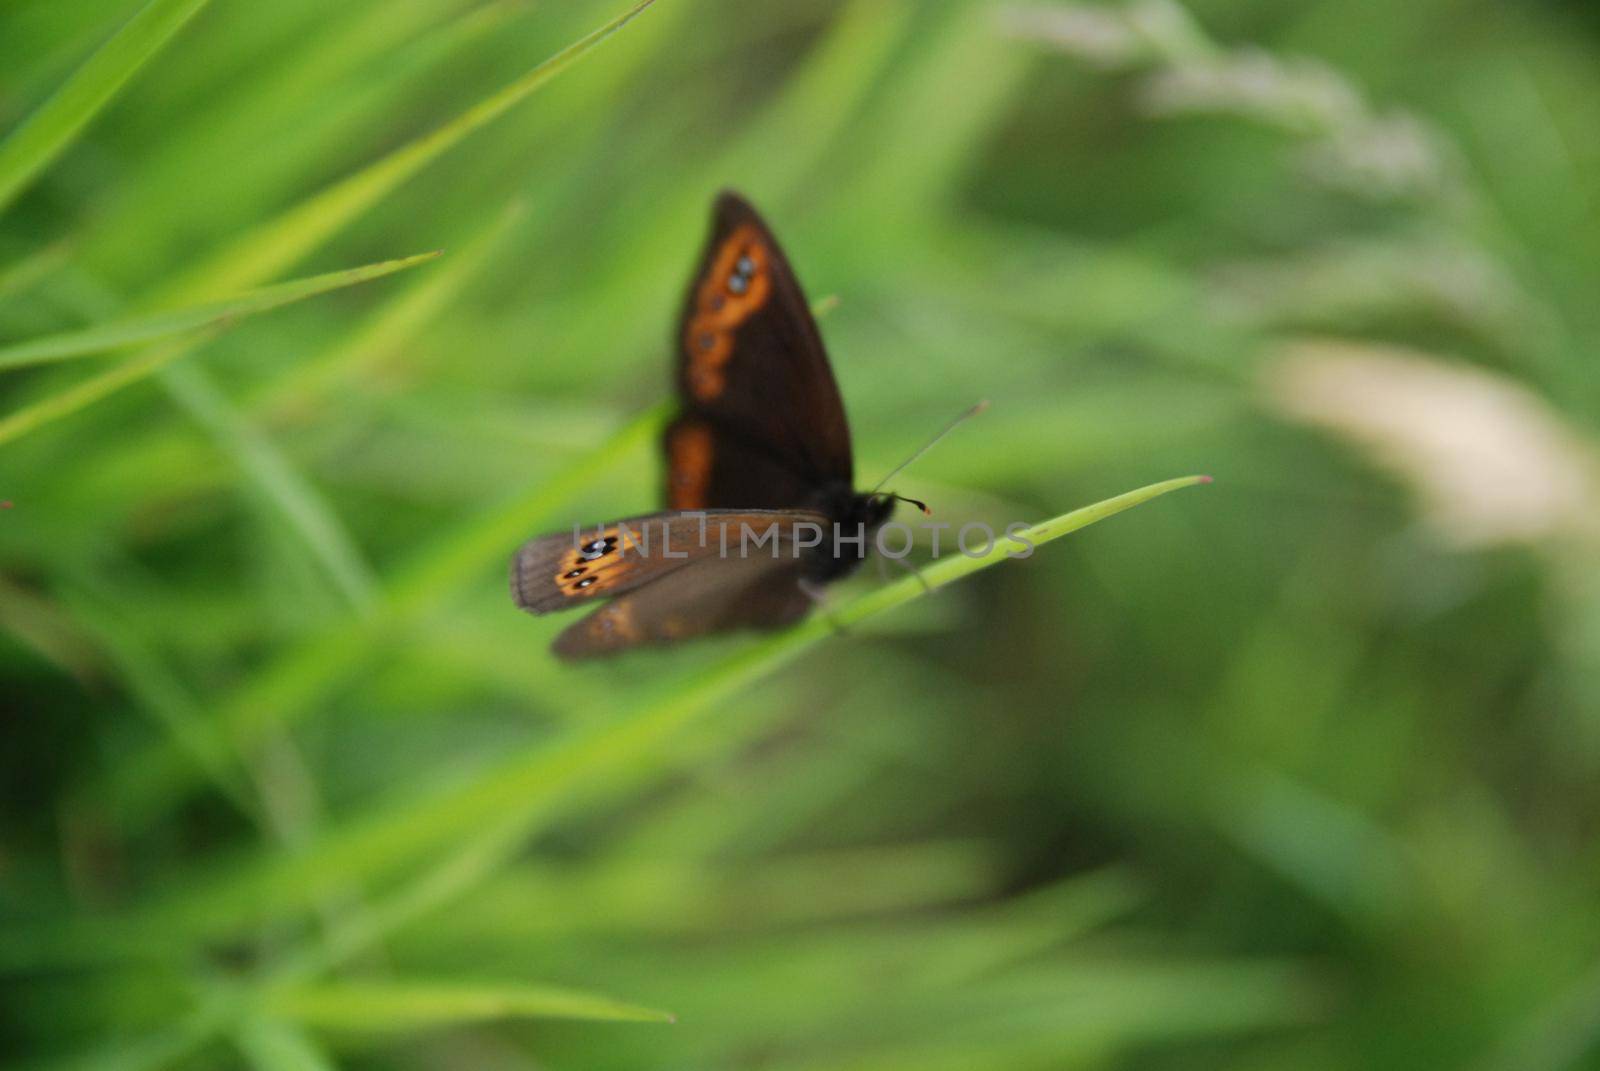 brow butterfly in grass by dotshock